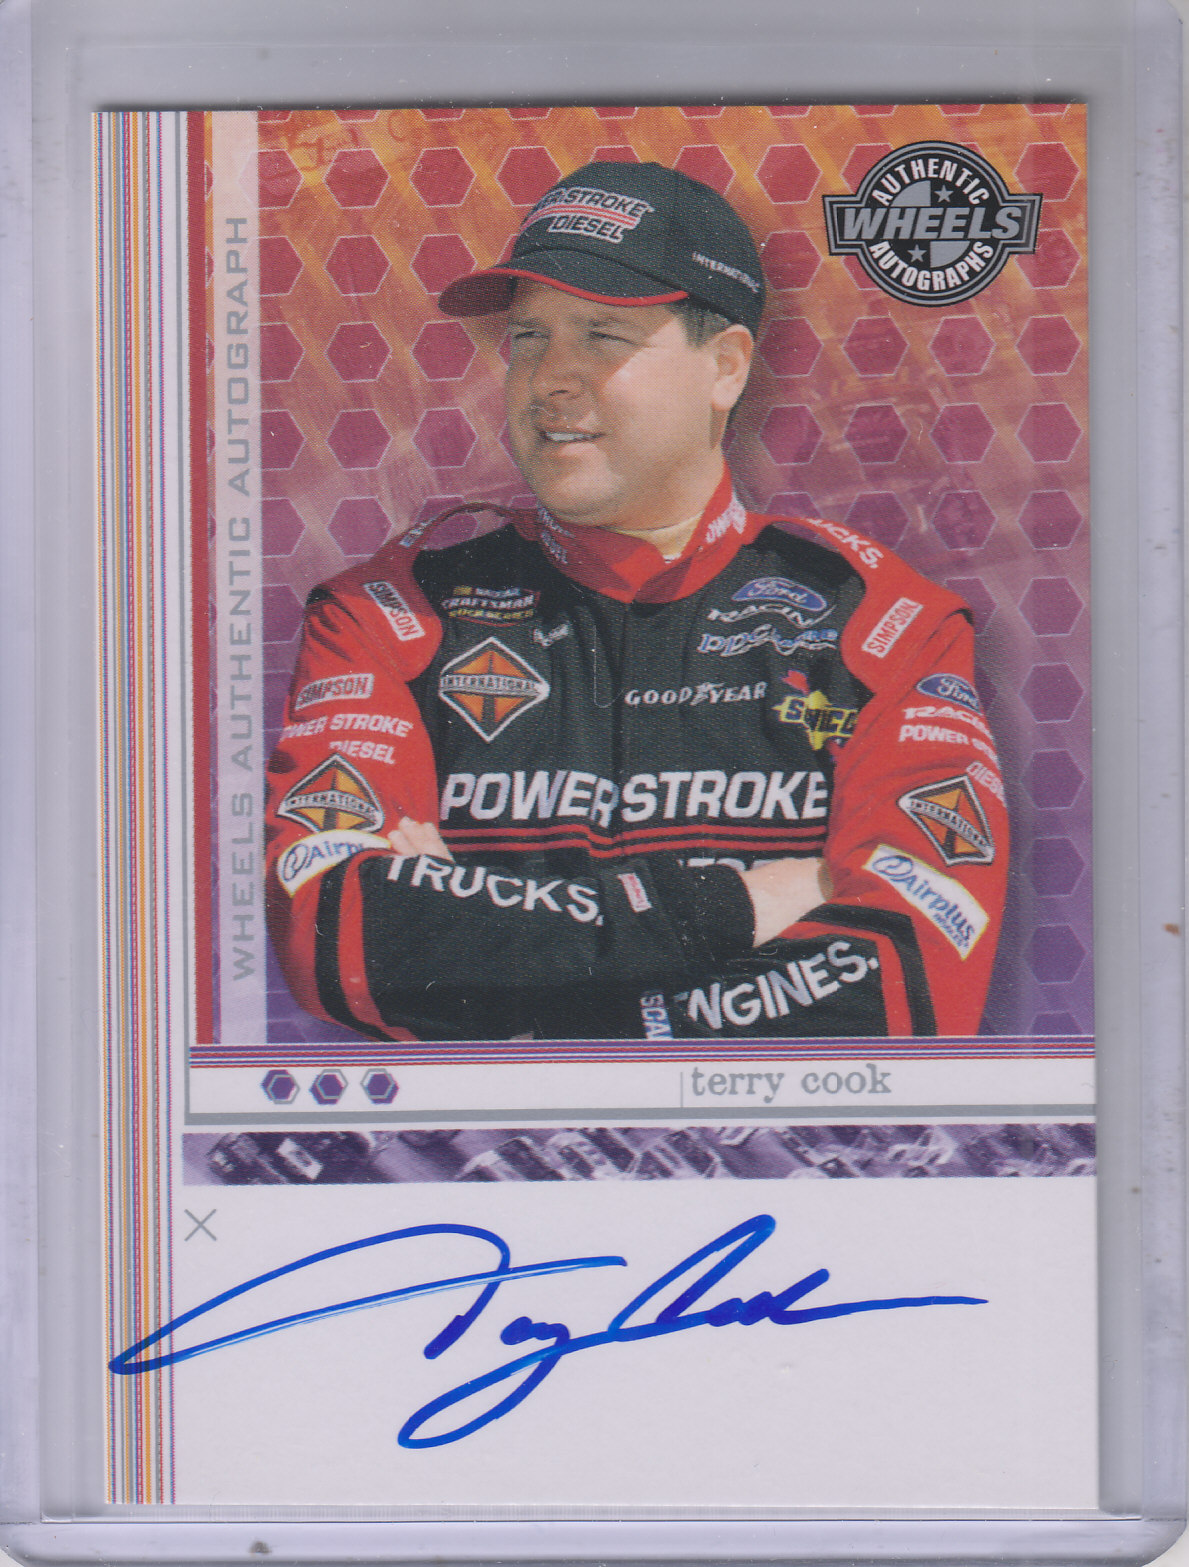 2004 Wheels Autographs #12 Terry Cook AT